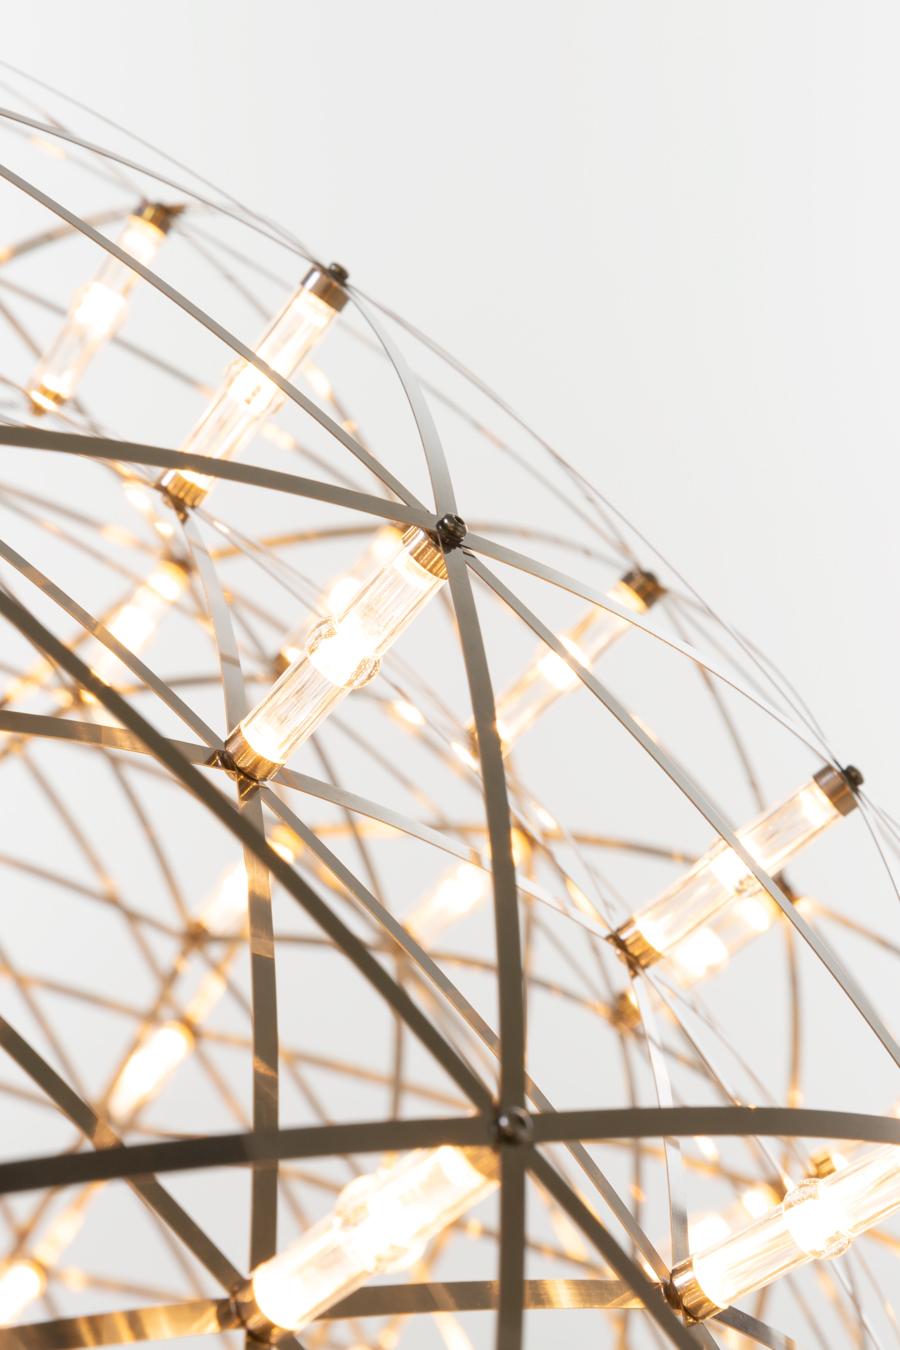 The Raimond lights: perfect spheres of mathematical ingredients punctuated by tiny LED lights. Designer Raimond Puts was not only intrigued by the shape of the geodesic dome, but also with the mystery of prime numbers. It’s no coincidence that the